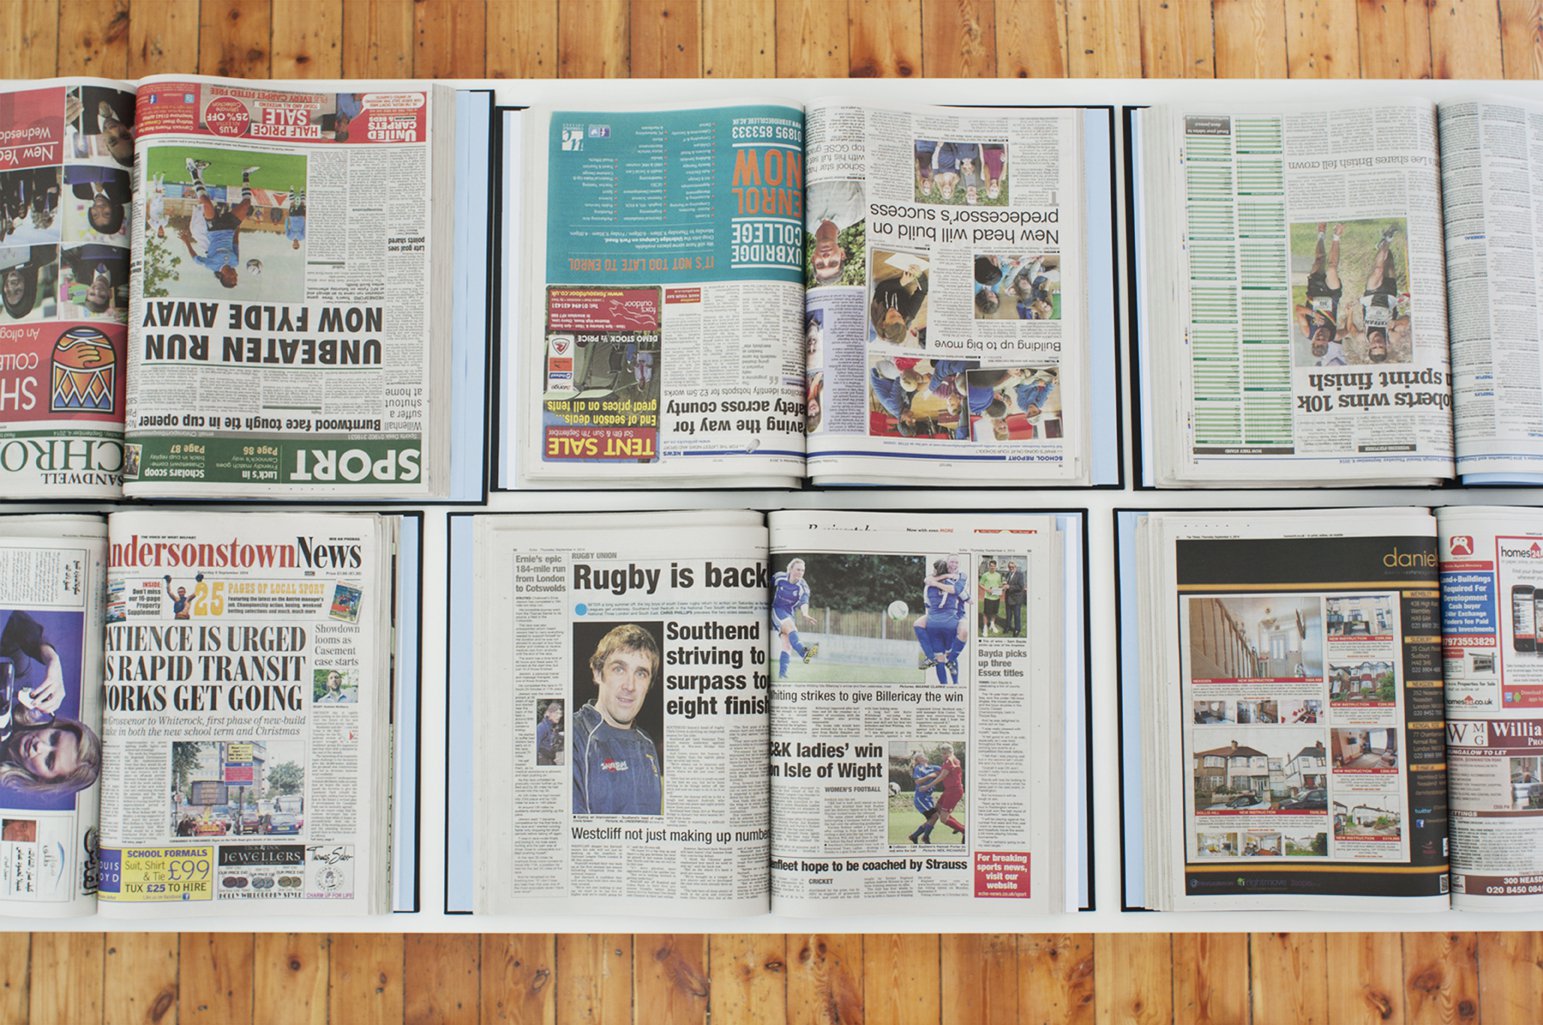 Banu Cennetoğlu, 04.09.2014, 46 volumes of newspapers printed in the UK on 04.09.2014, hardcover bound, 2014